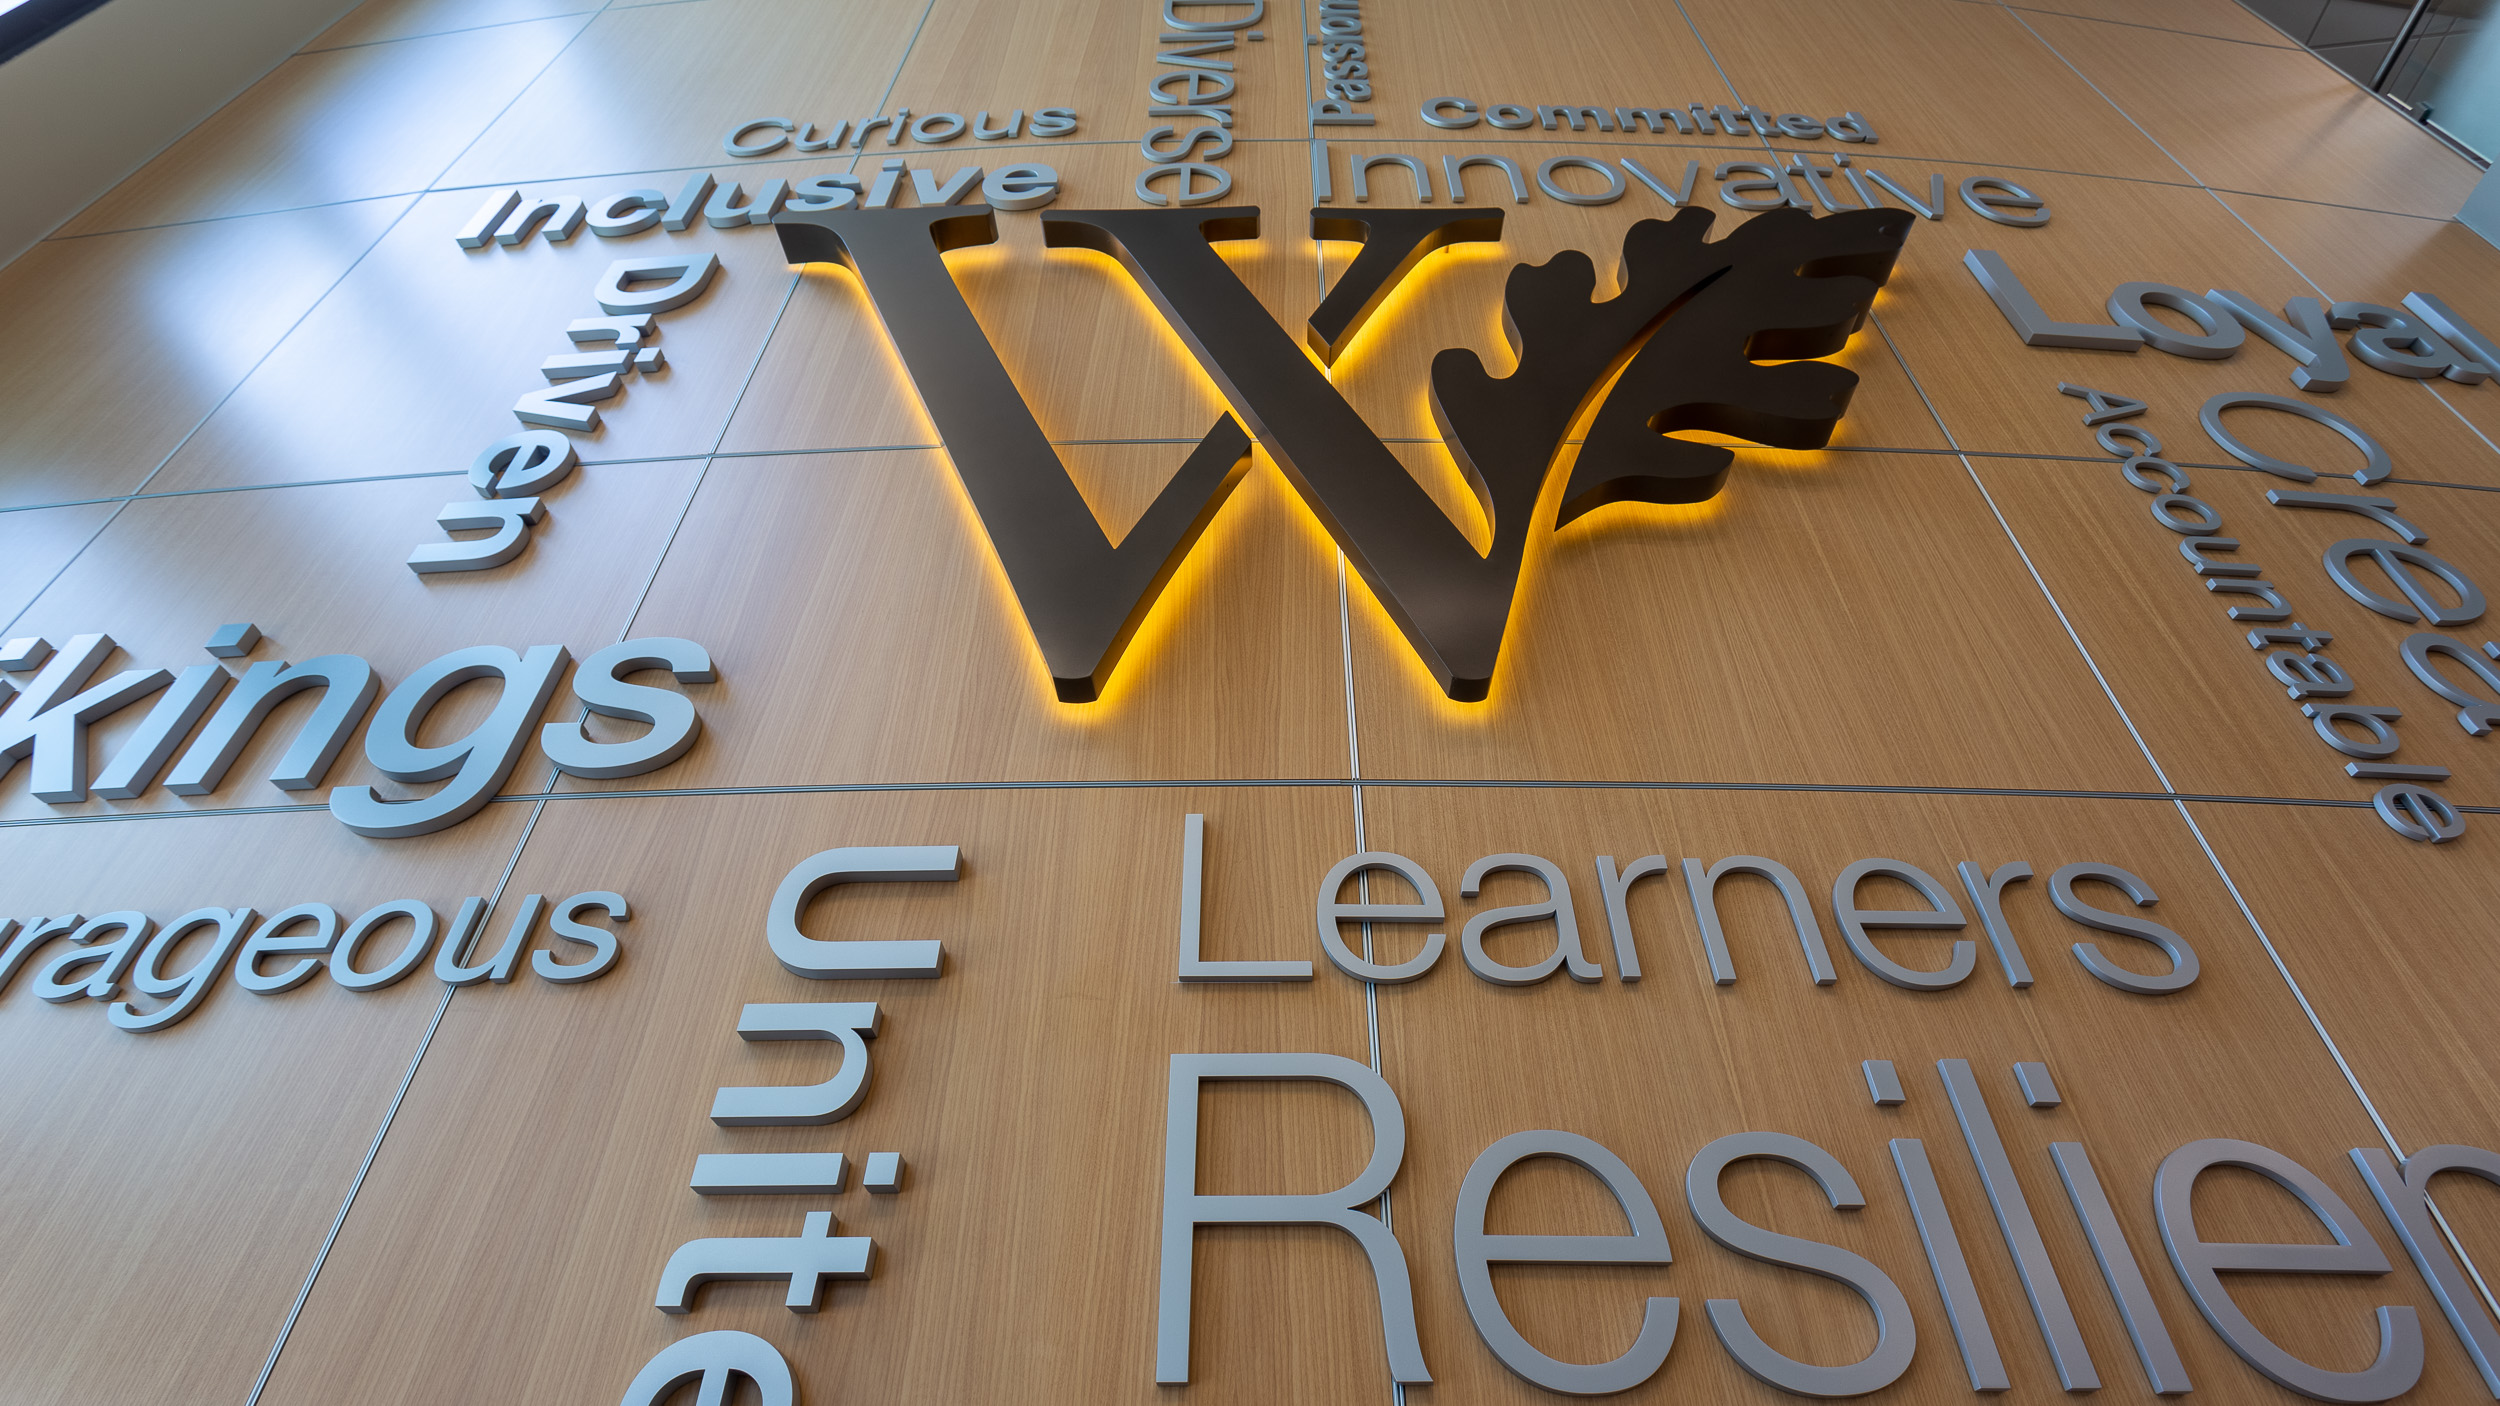 West Valley College Student Services Center Logo & Traits Feature Wall Dimensional Lettering